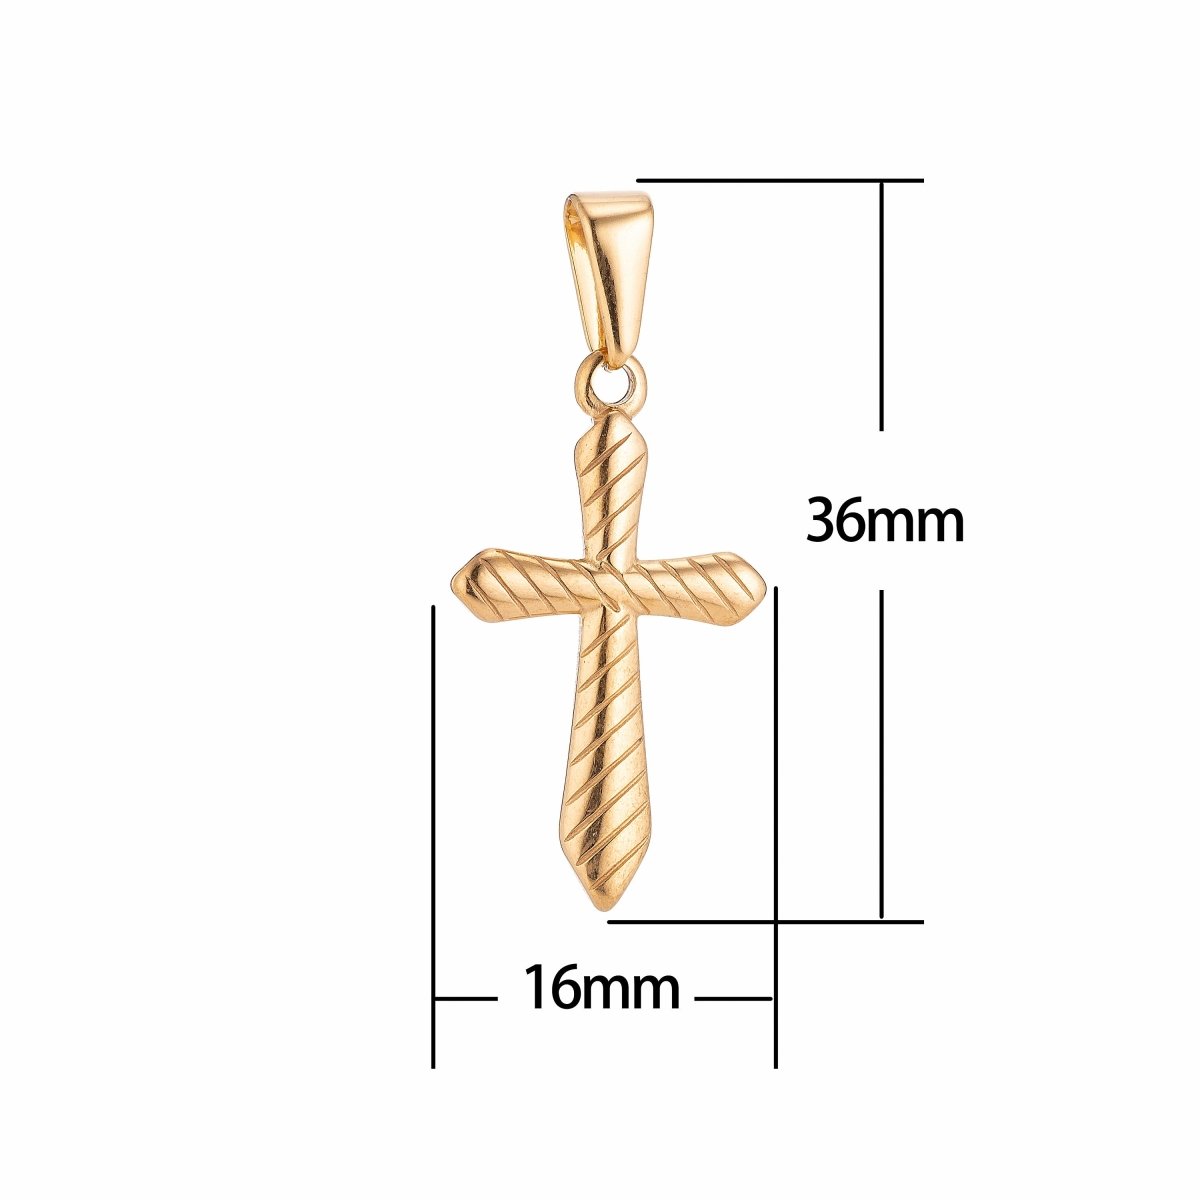 On Sale! CLEARANCE! Cross with Stripes Jesus Faith Love Hope 24K Gold Filled Stainless Steel Silver Pendant w/ Bails Findings for Dangle Necklace Jewelry Making J-384 - DLUXCA